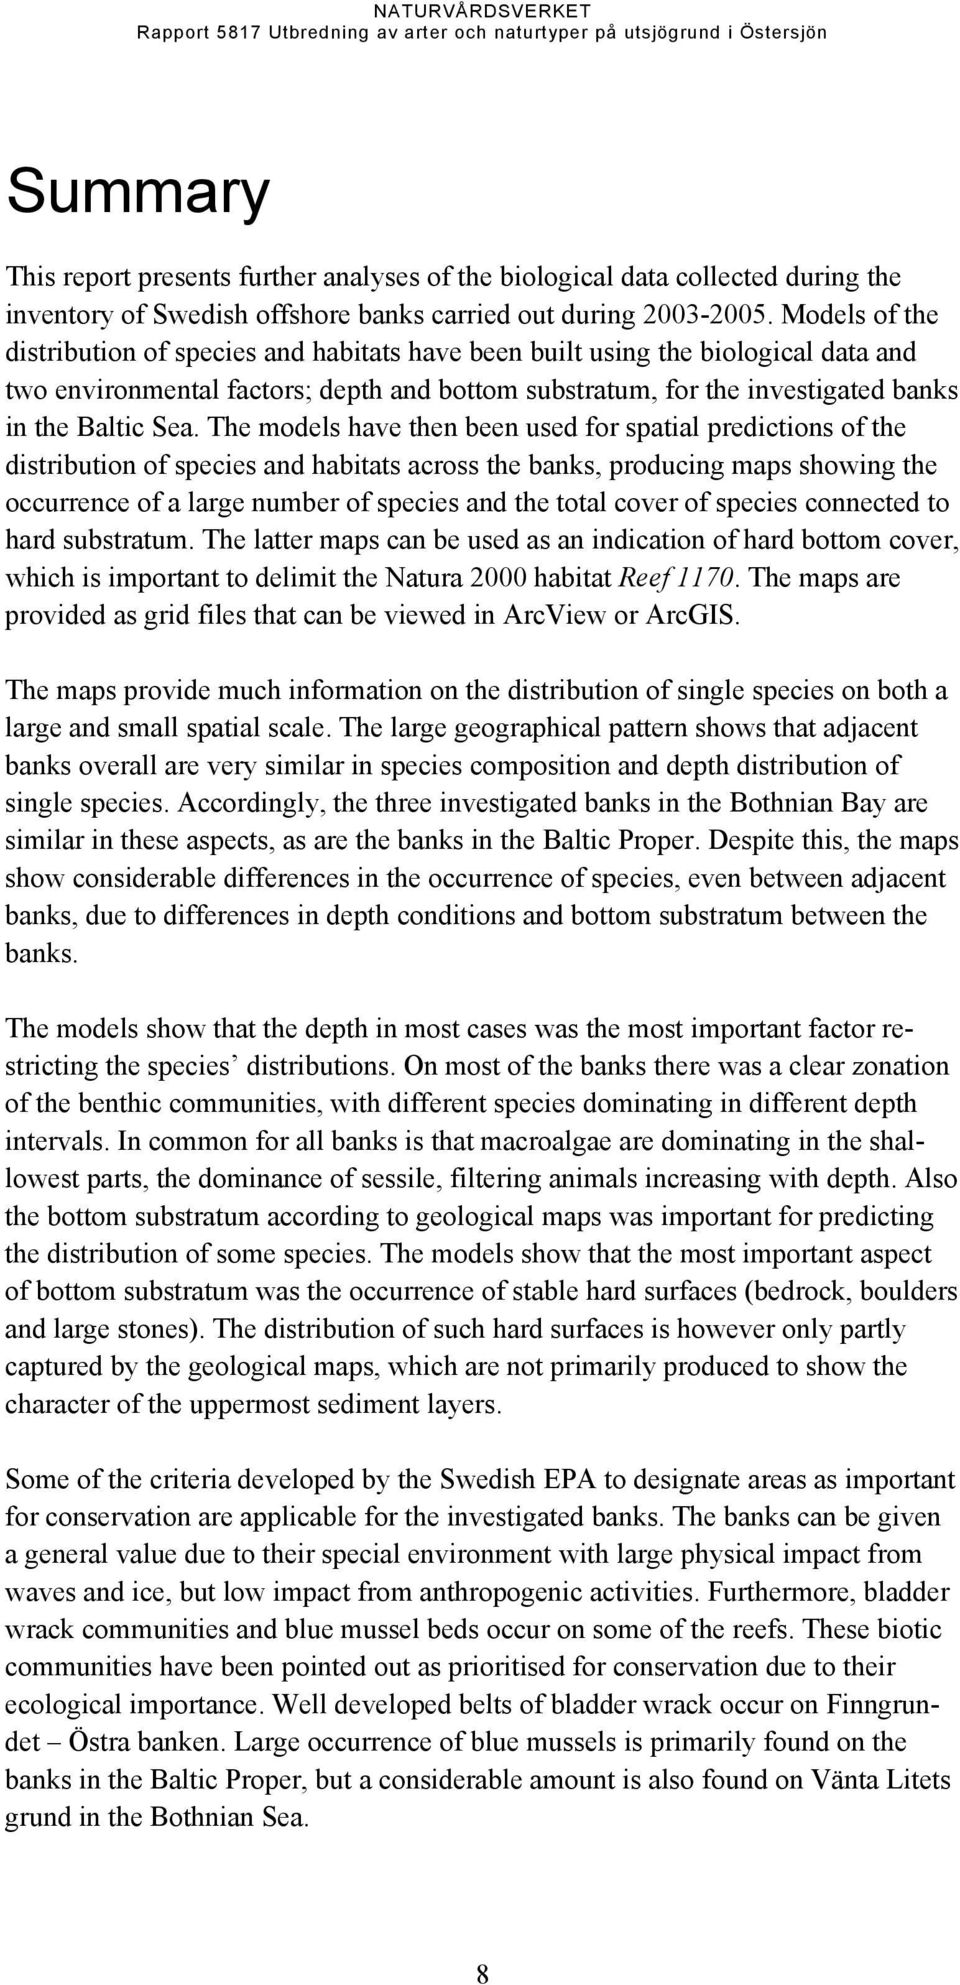 The models have then been used for spatial predictions of the distribution of species and habitats across the banks, producing maps showing the occurrence of a large number of species and the total